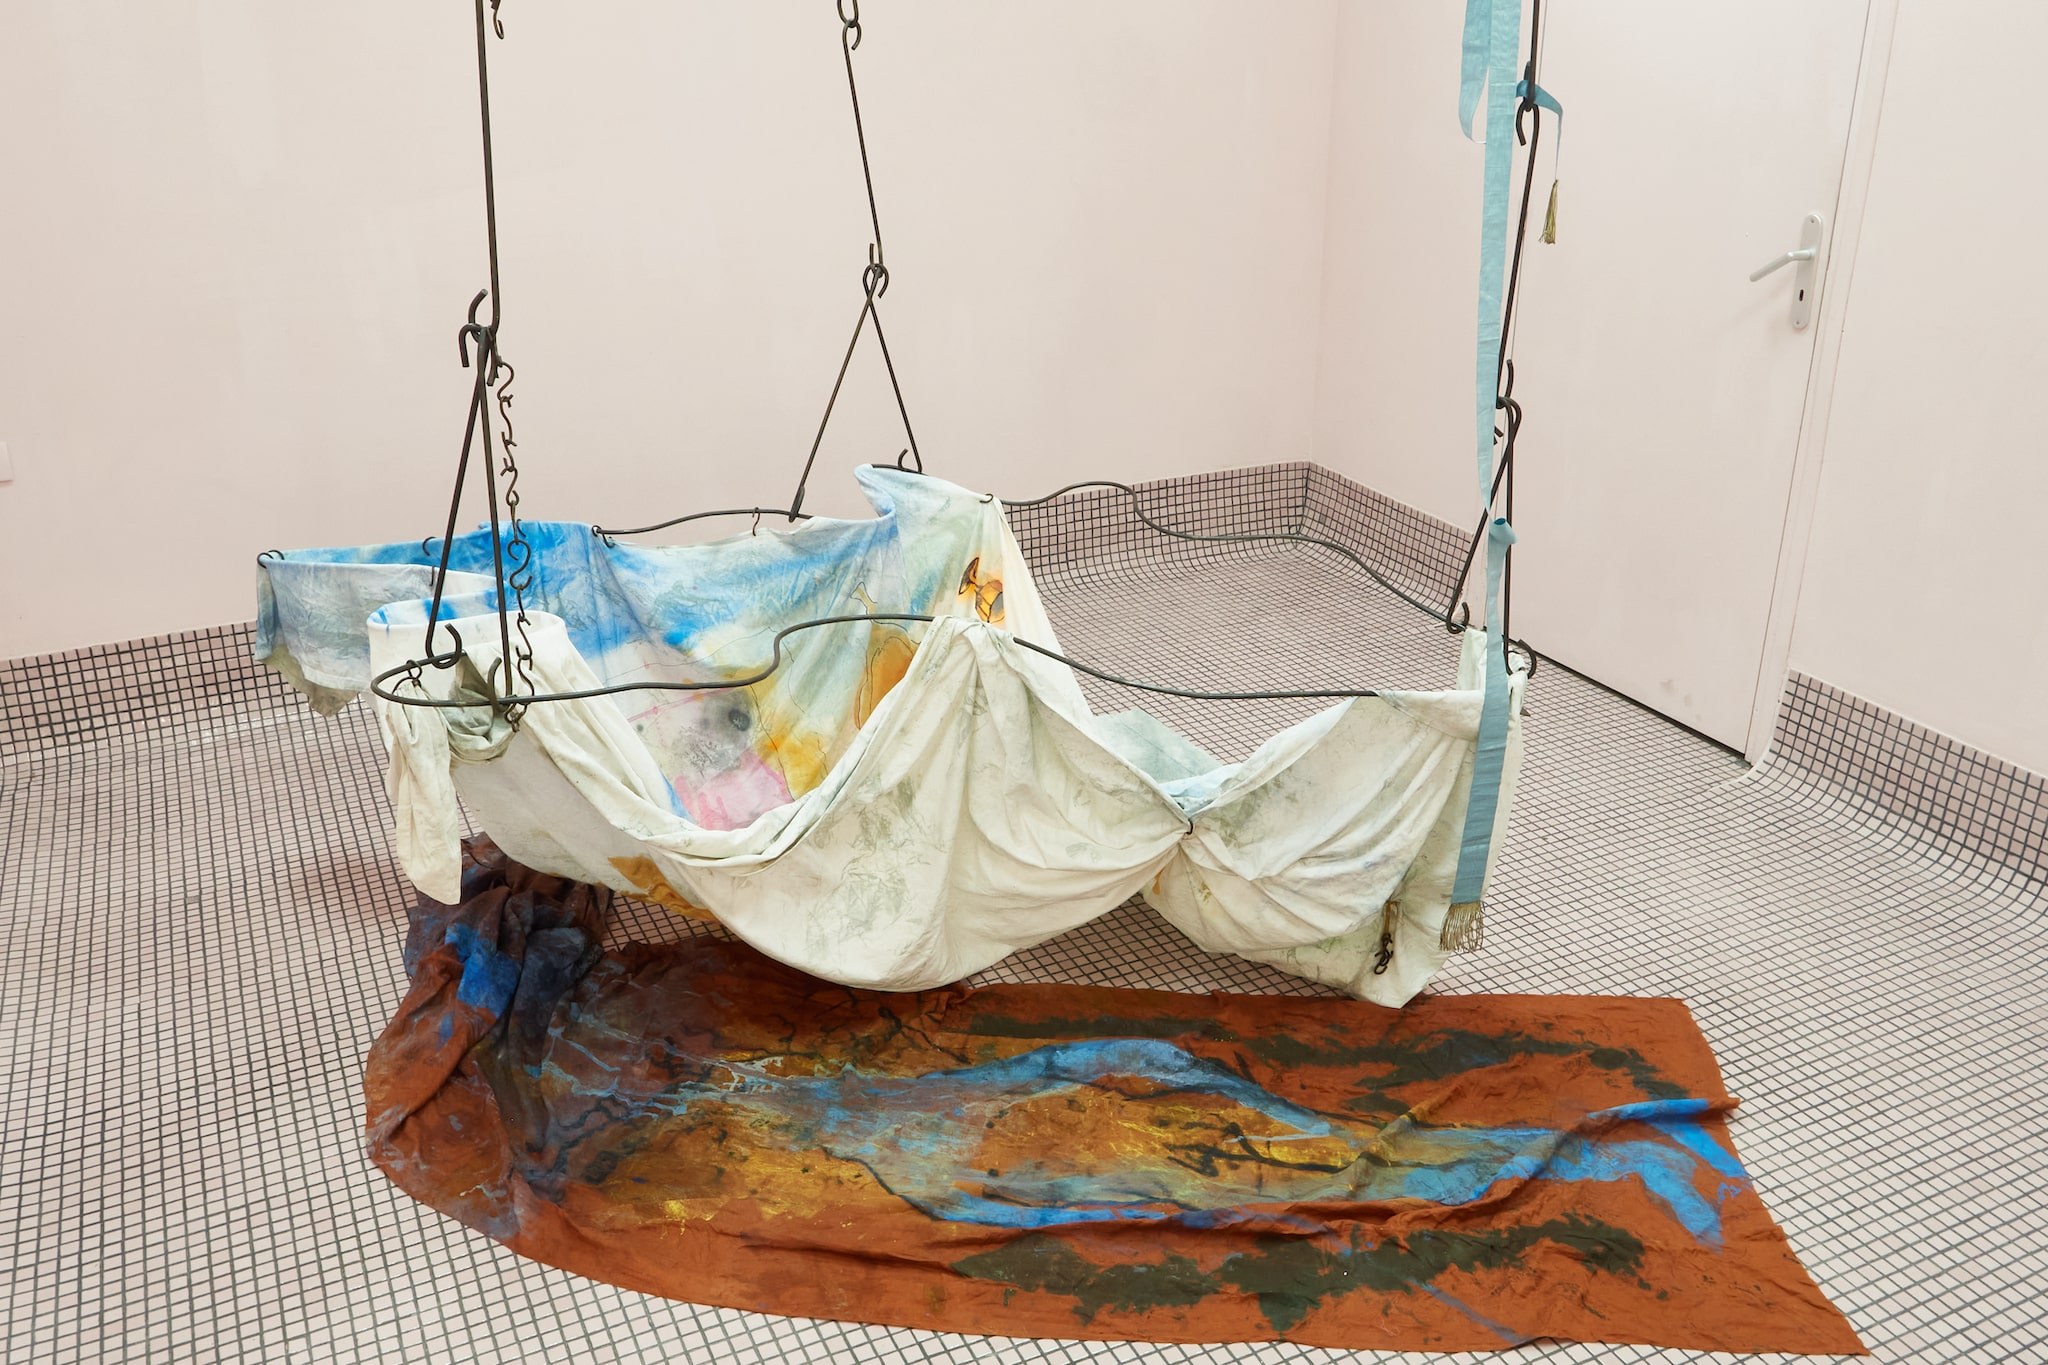 INÈS DI FOLCO DJEMNI AND CAROLINE CURDY: NARCISSE, 2023 - Oil and pigments on cotton, silk and forged steel 240 x 100 x 280 cm